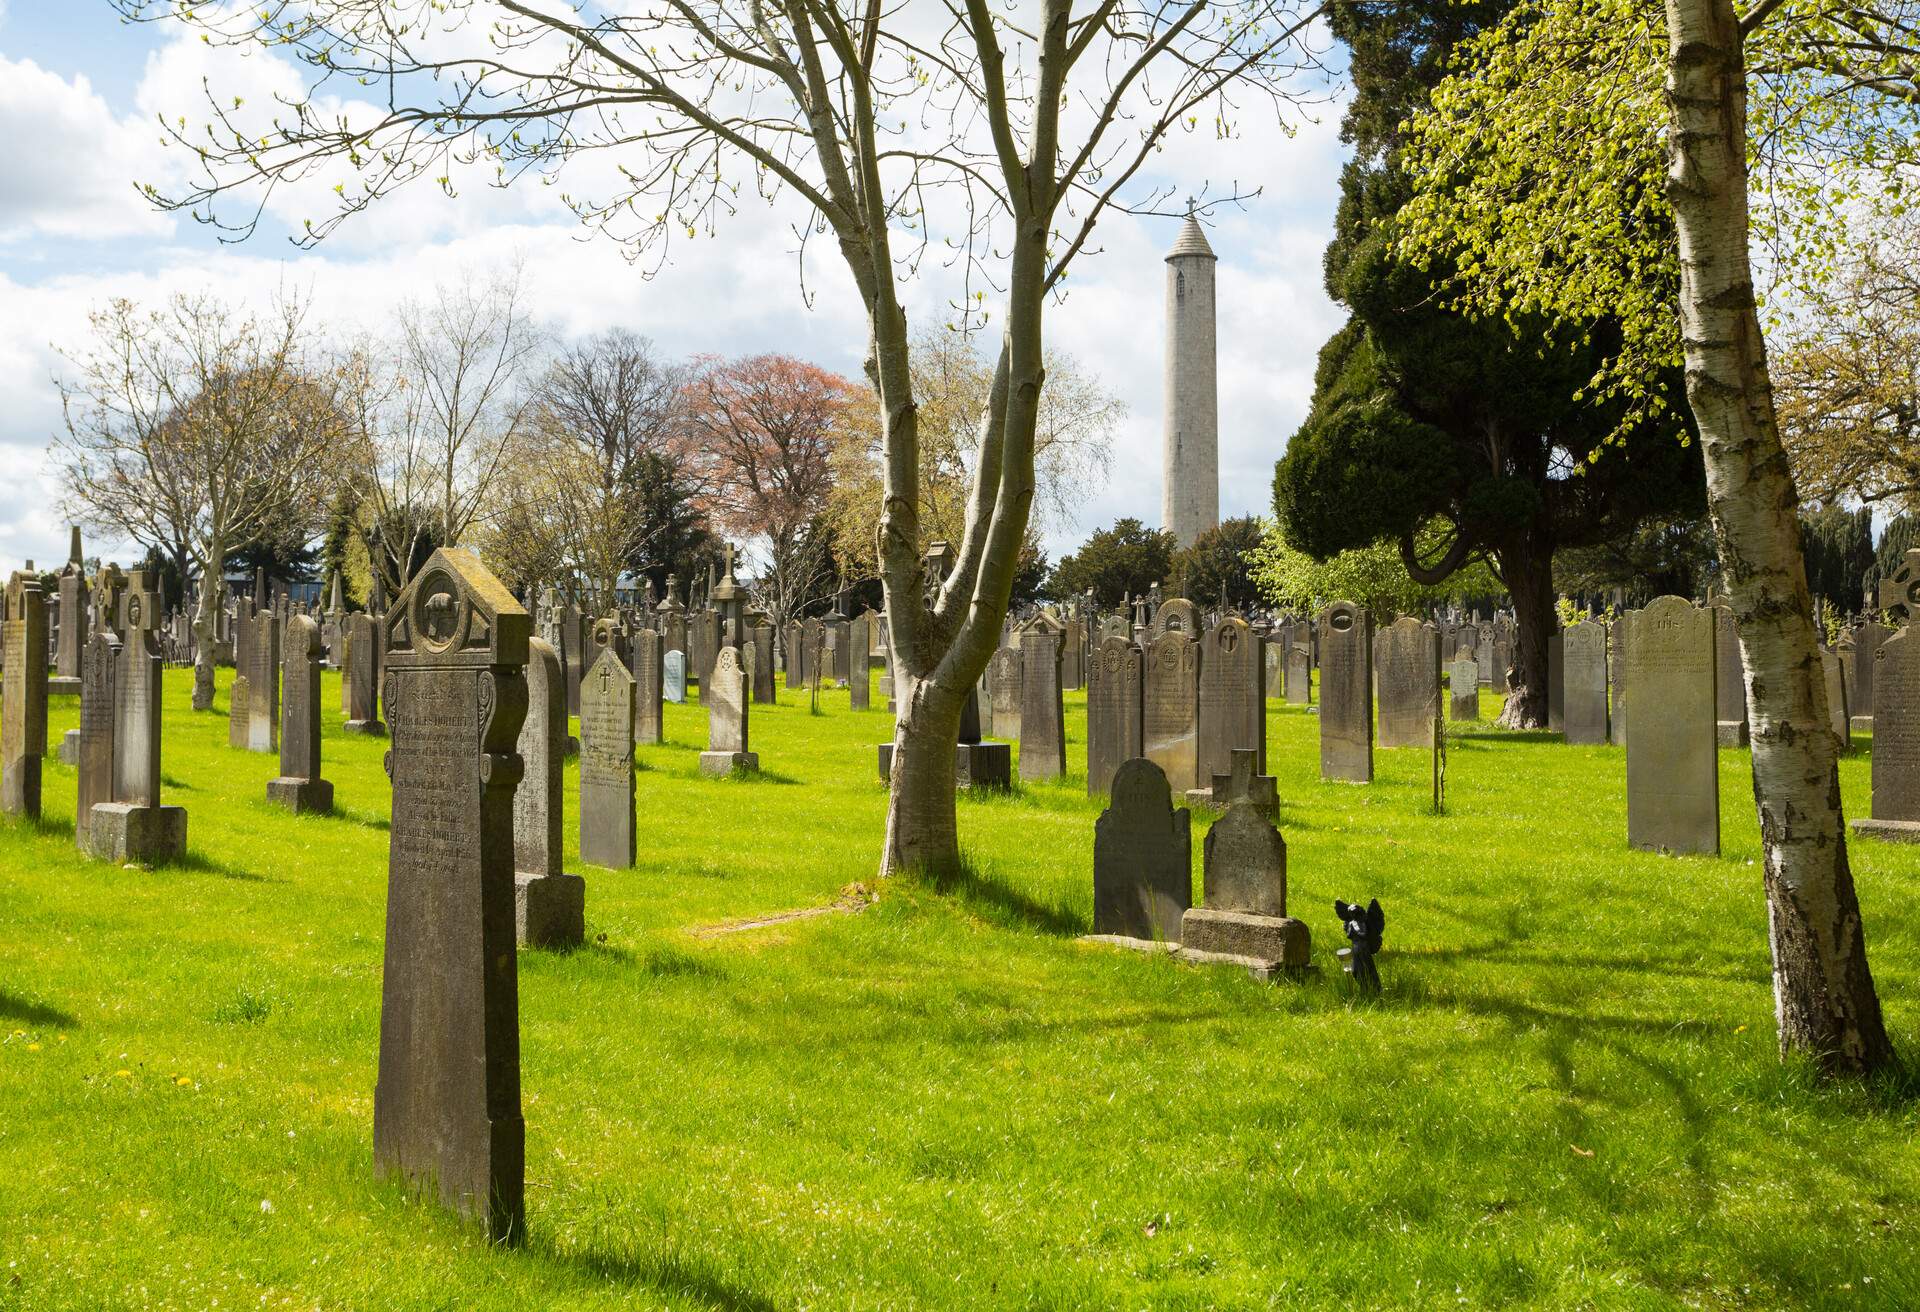 Tombstones in the cemetery of Glasnevin in Dublin on a sunny day